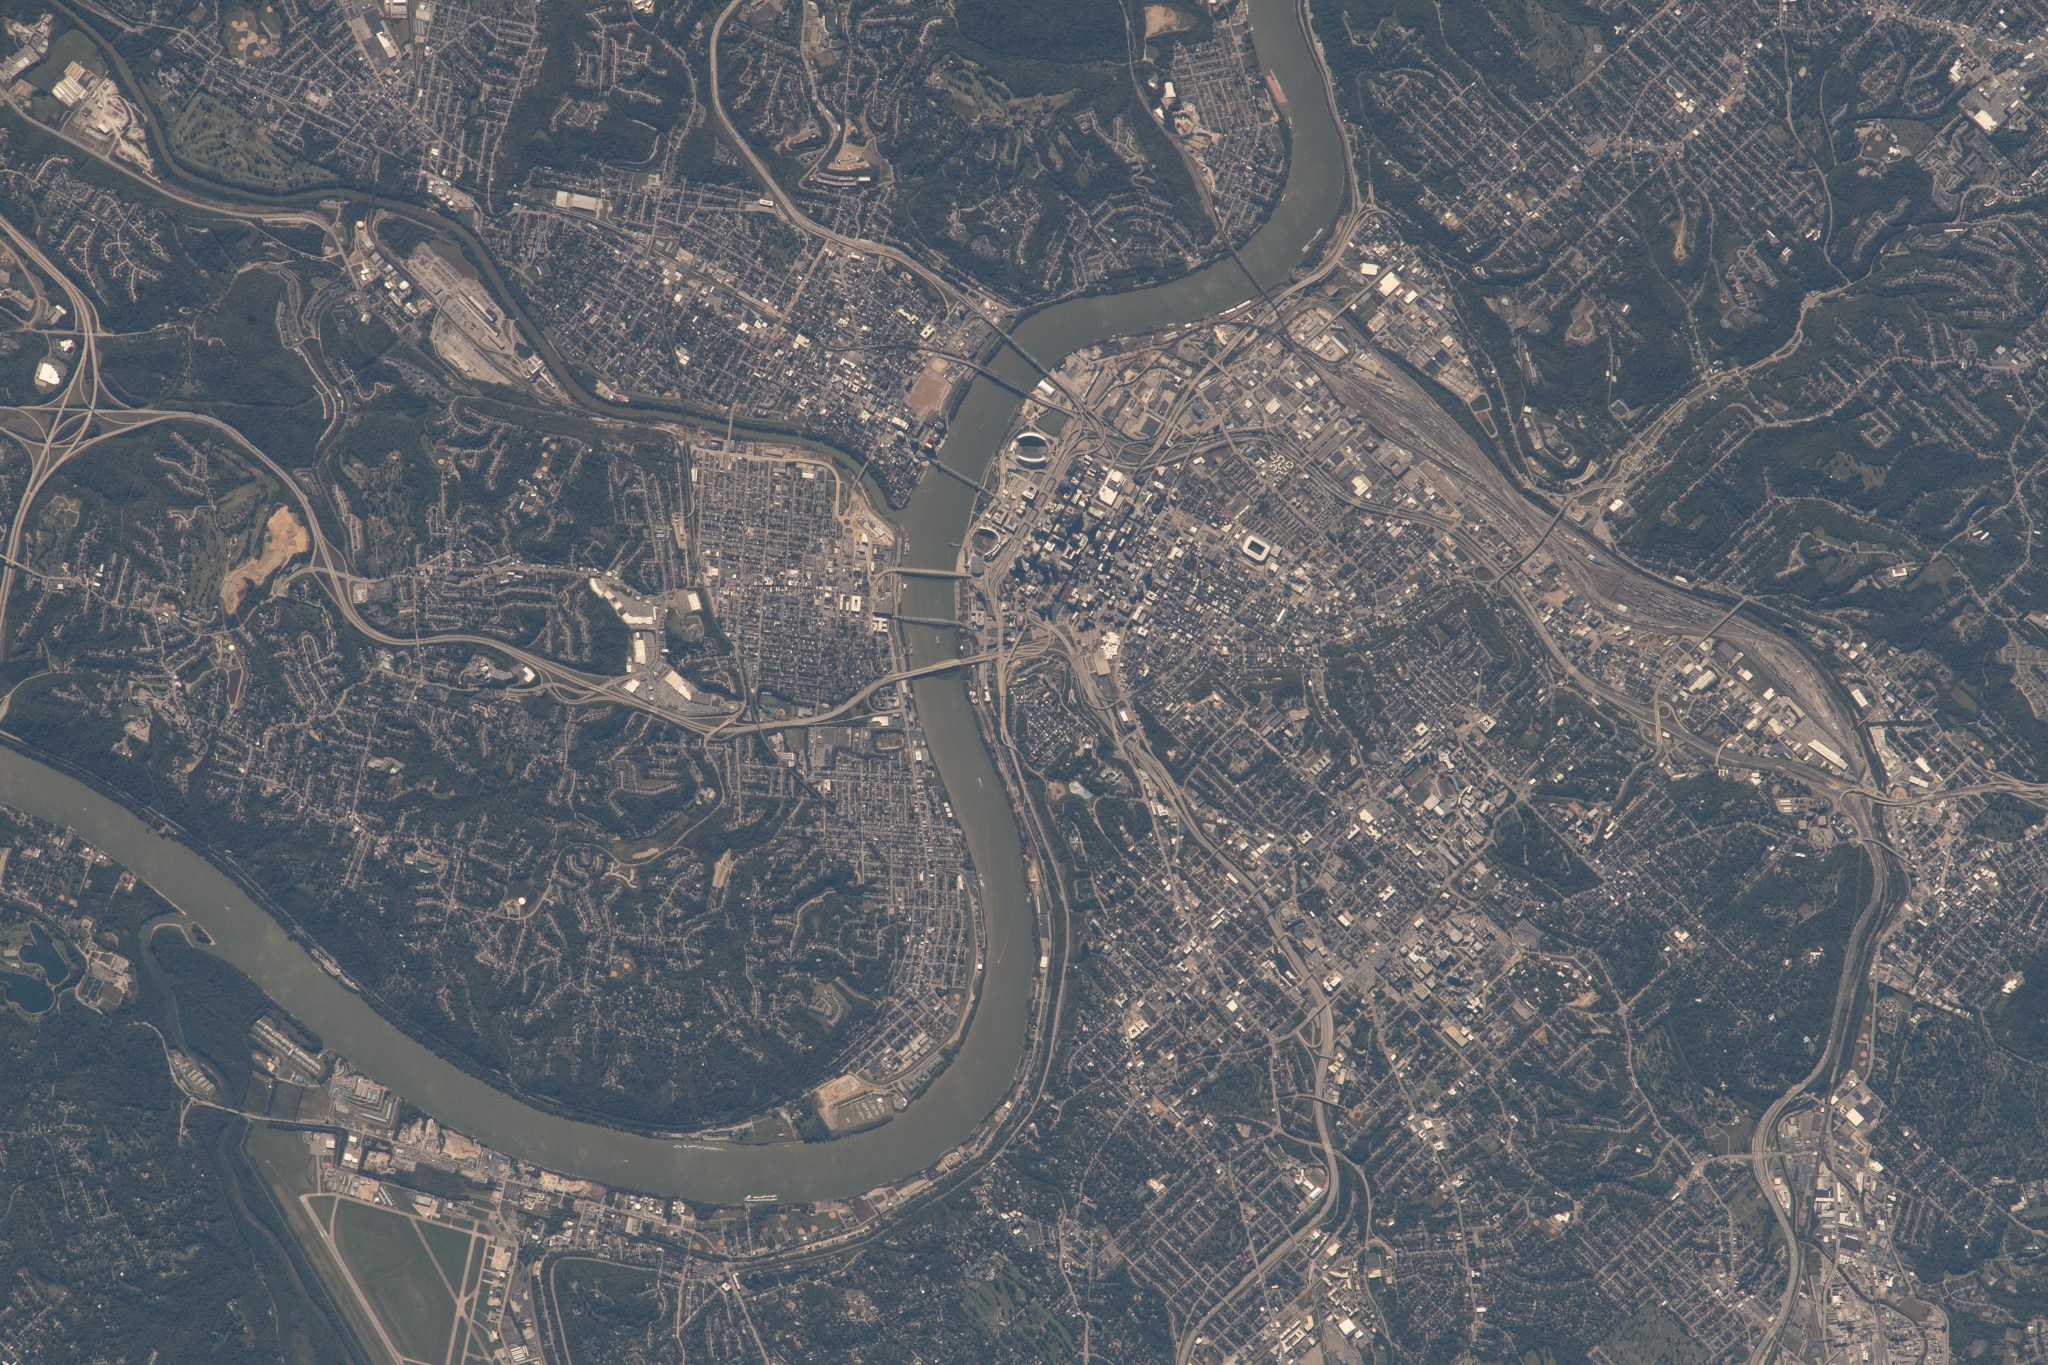 iss068e006622 (Sept. 30, 2022) --- The Ohio River splits the U.S. cities of Cincinnati, Ohio (left), and Covington, Kentucky (right), in this photograph of the International Space Station as it orbited 260 miles above the Buckeye State.